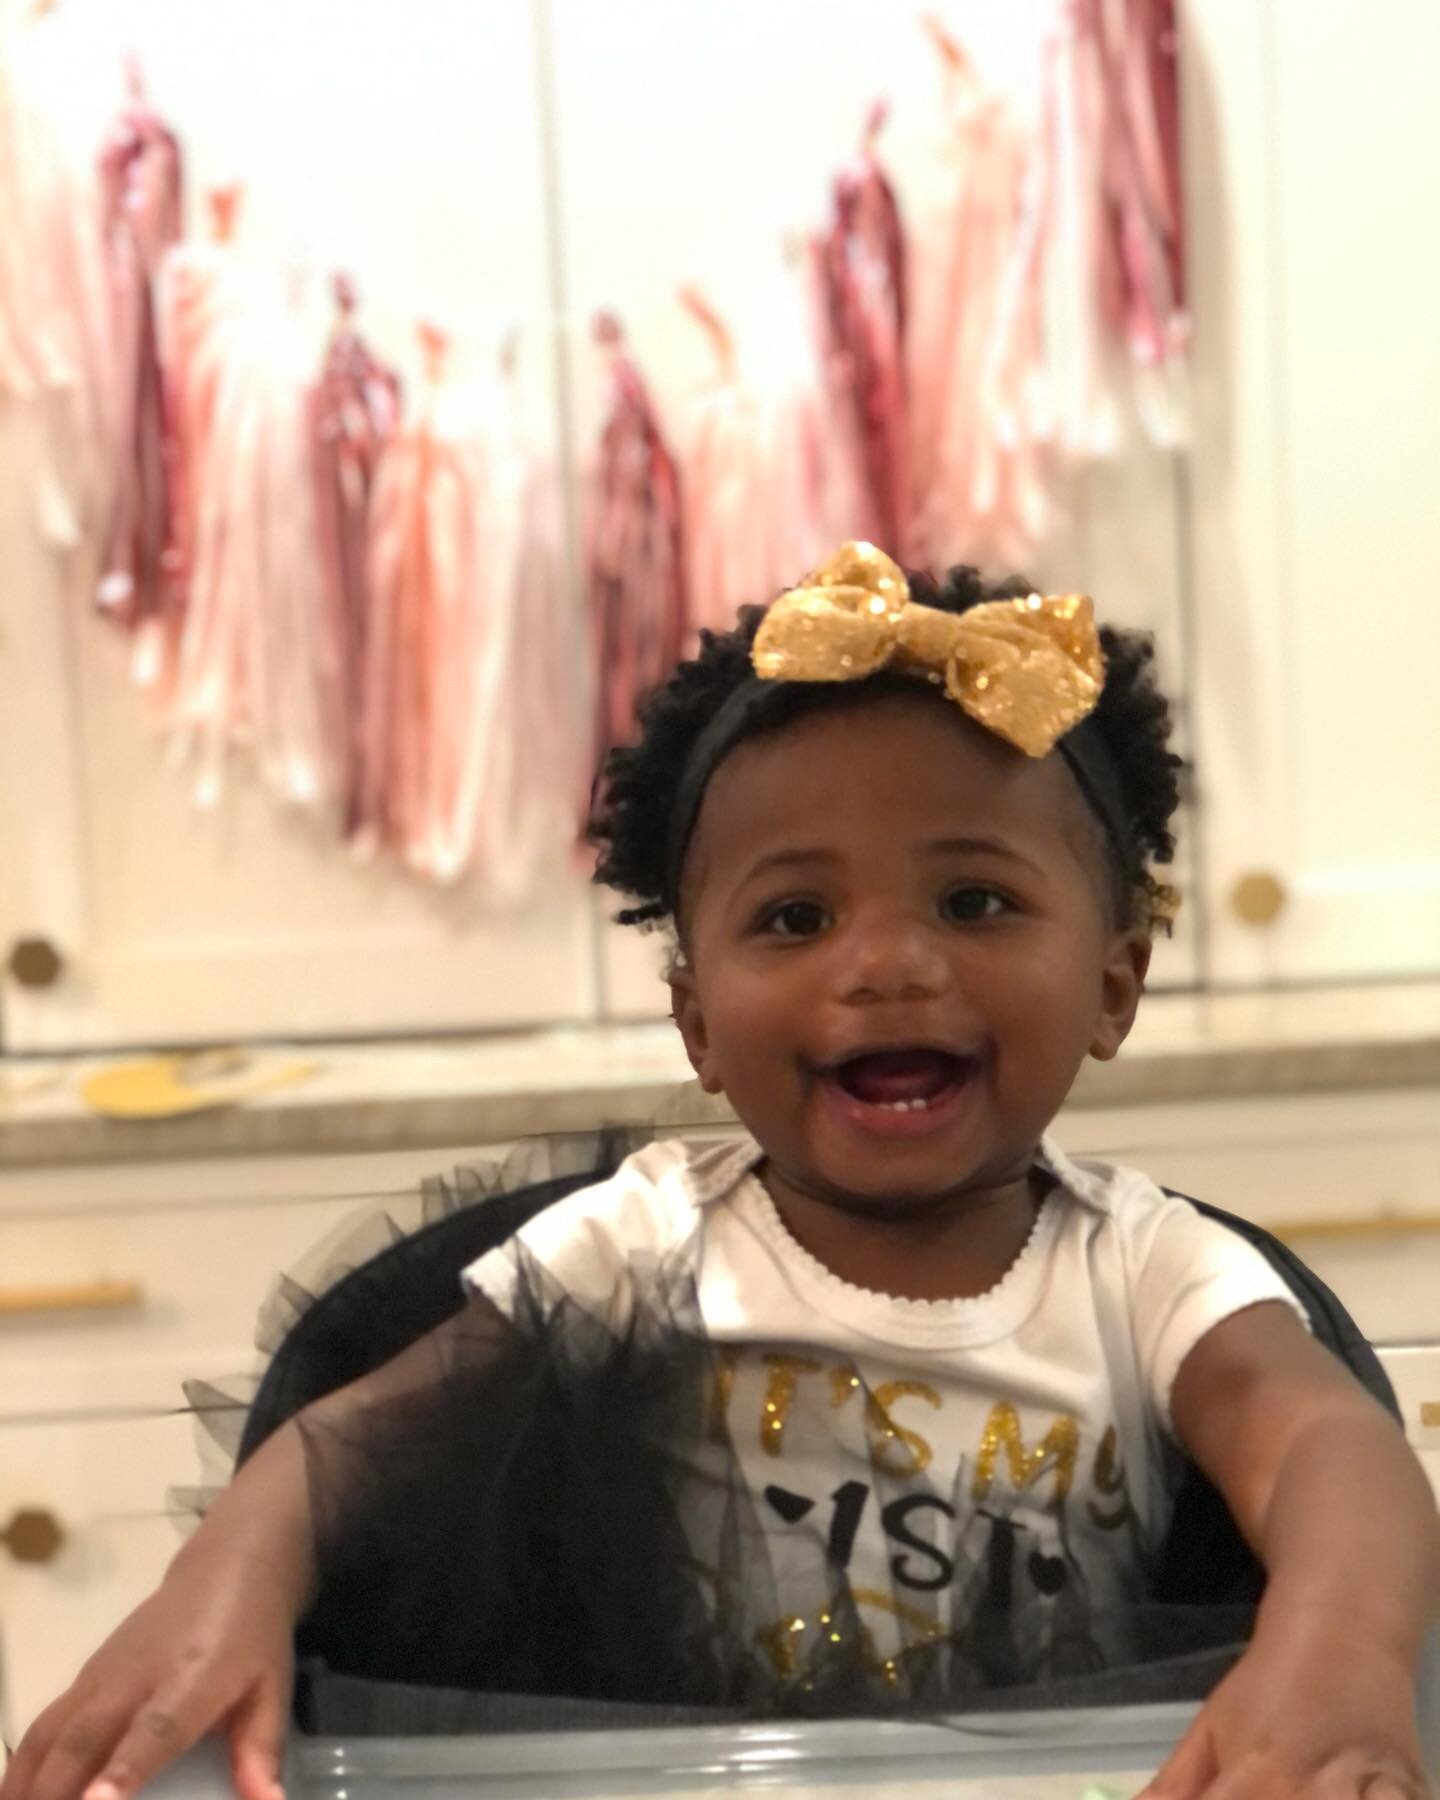 Words could never describe the love and the joy I feel. Thank you Cora, living angel, for coming into my life. Happy 1st birthday ❤️❤️❤️❤️❤️❤️❤️❤️❤️❤️❤️❤️❤️❤️❤️❤️❤️#angel #love #grateful #somekindofone-derful